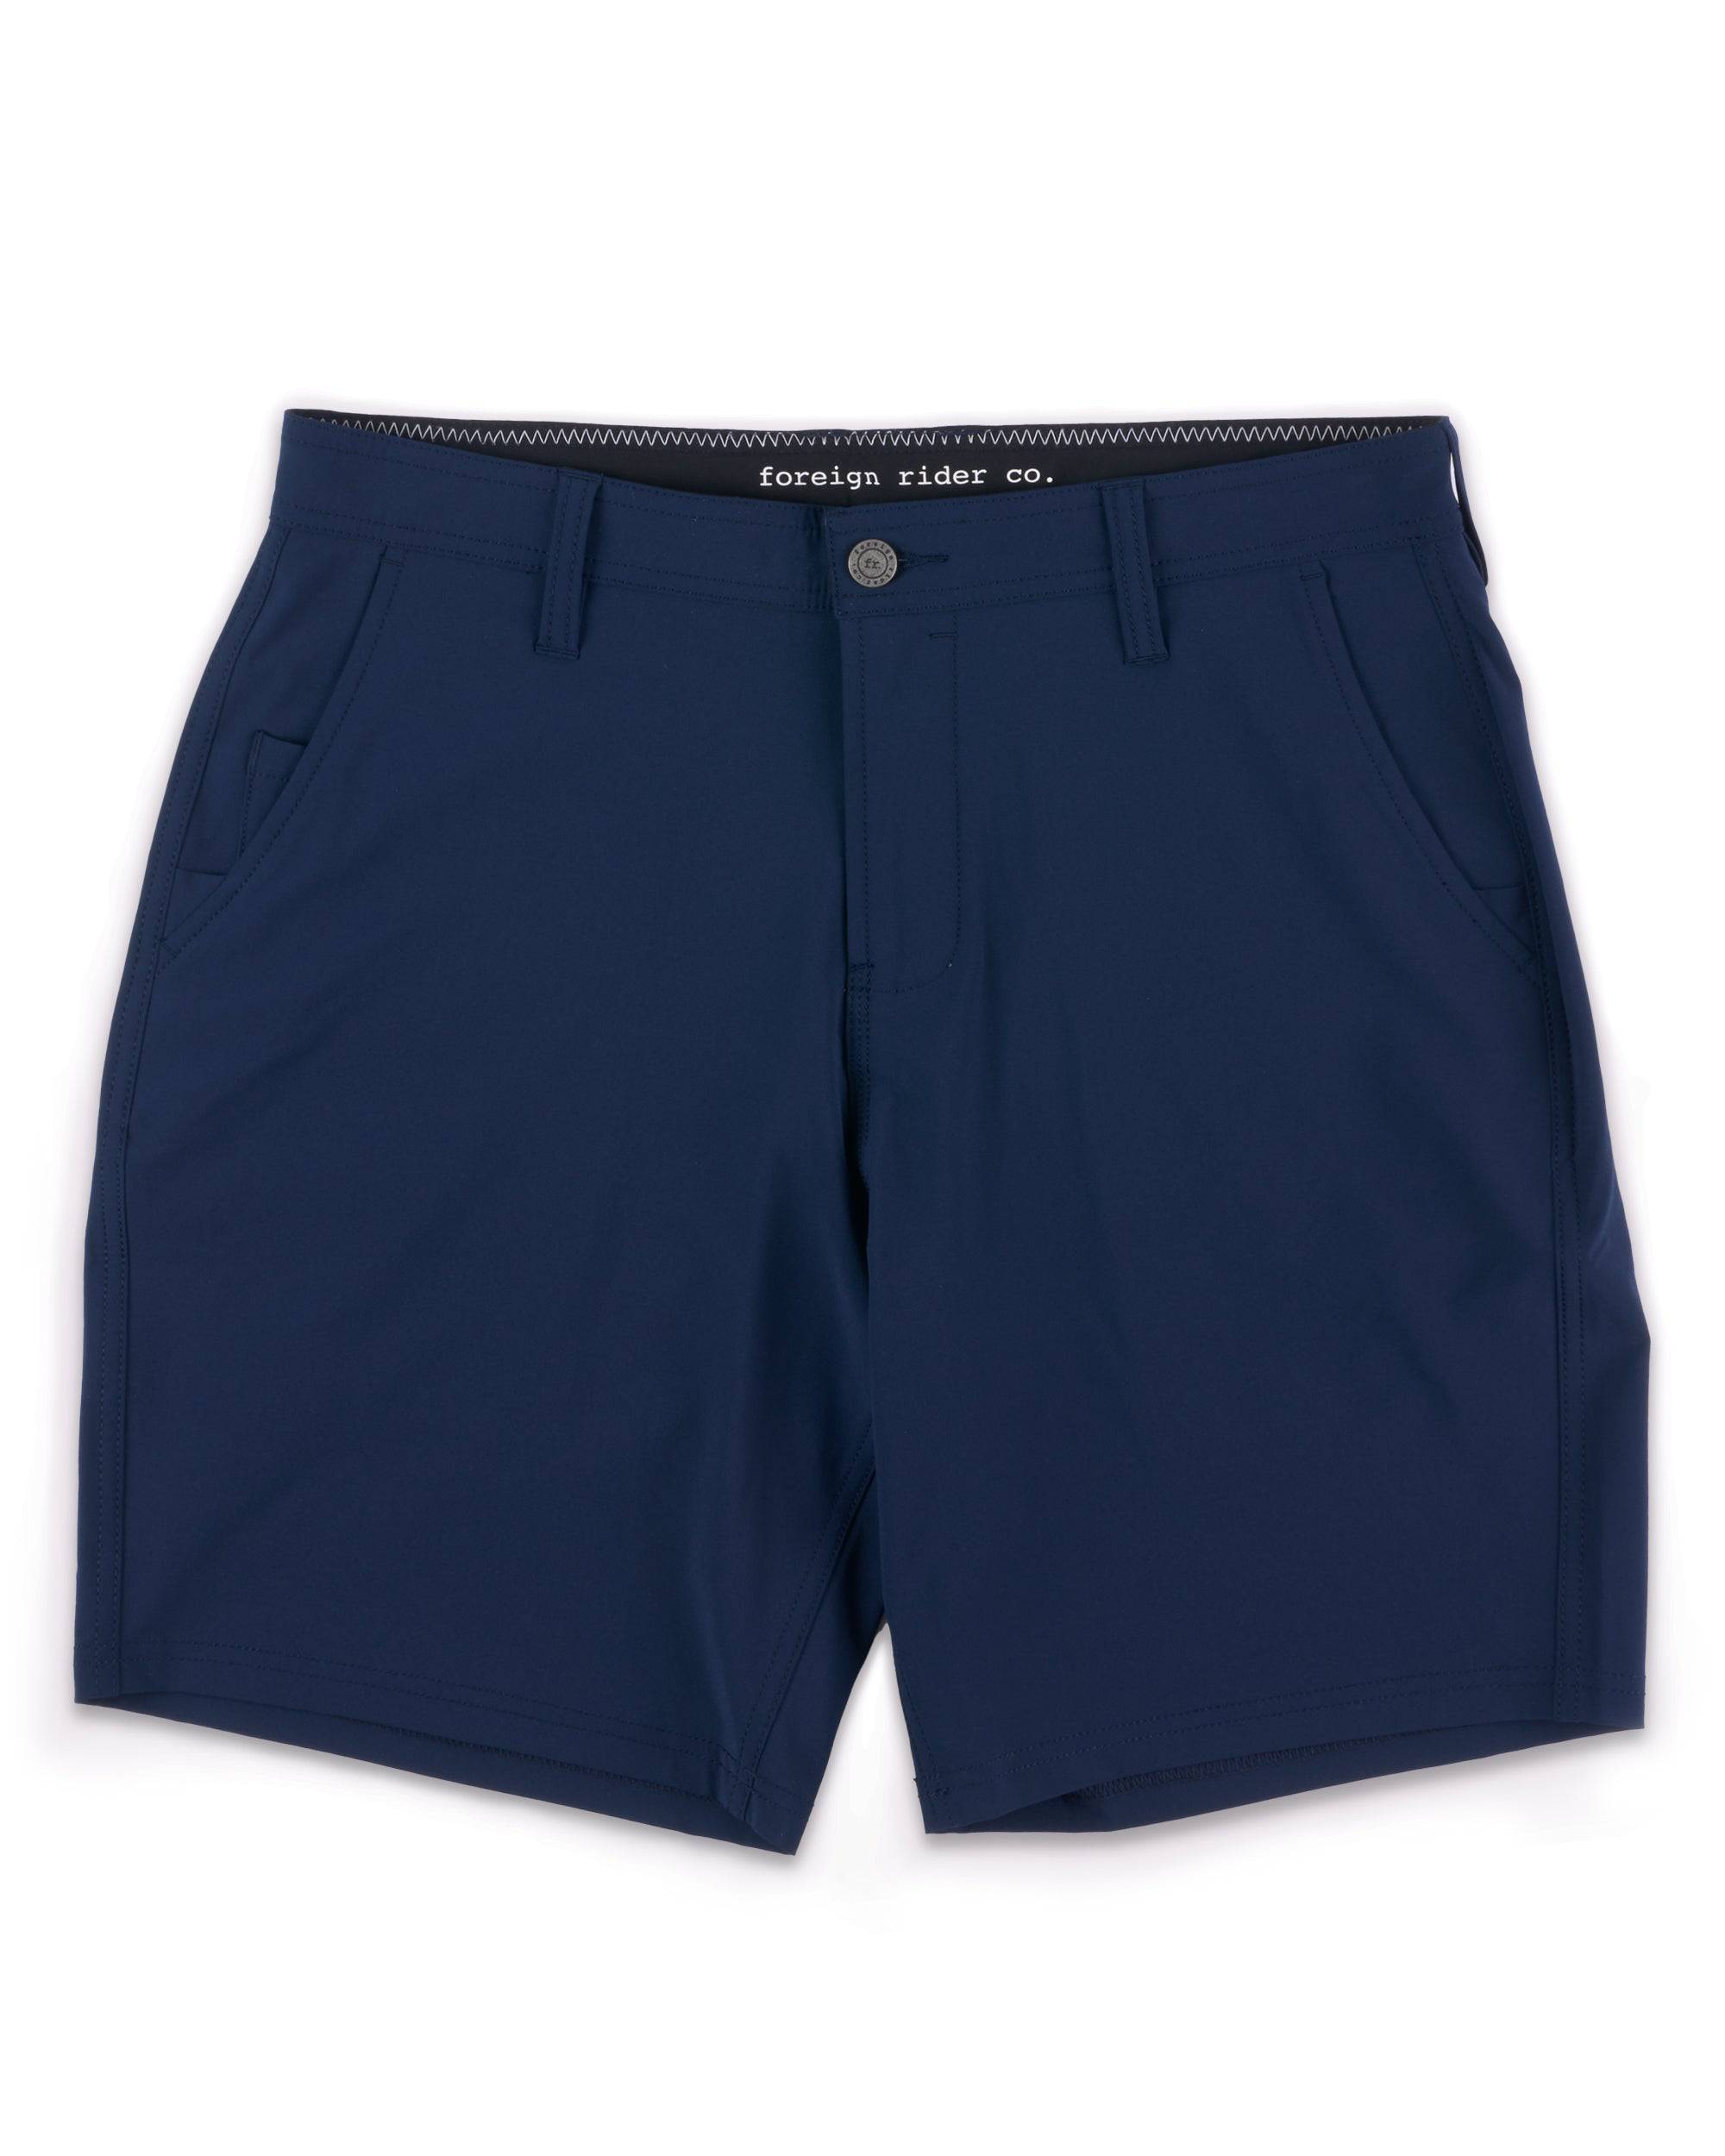 Performance Shorts Navy | Foreign Rider Co.